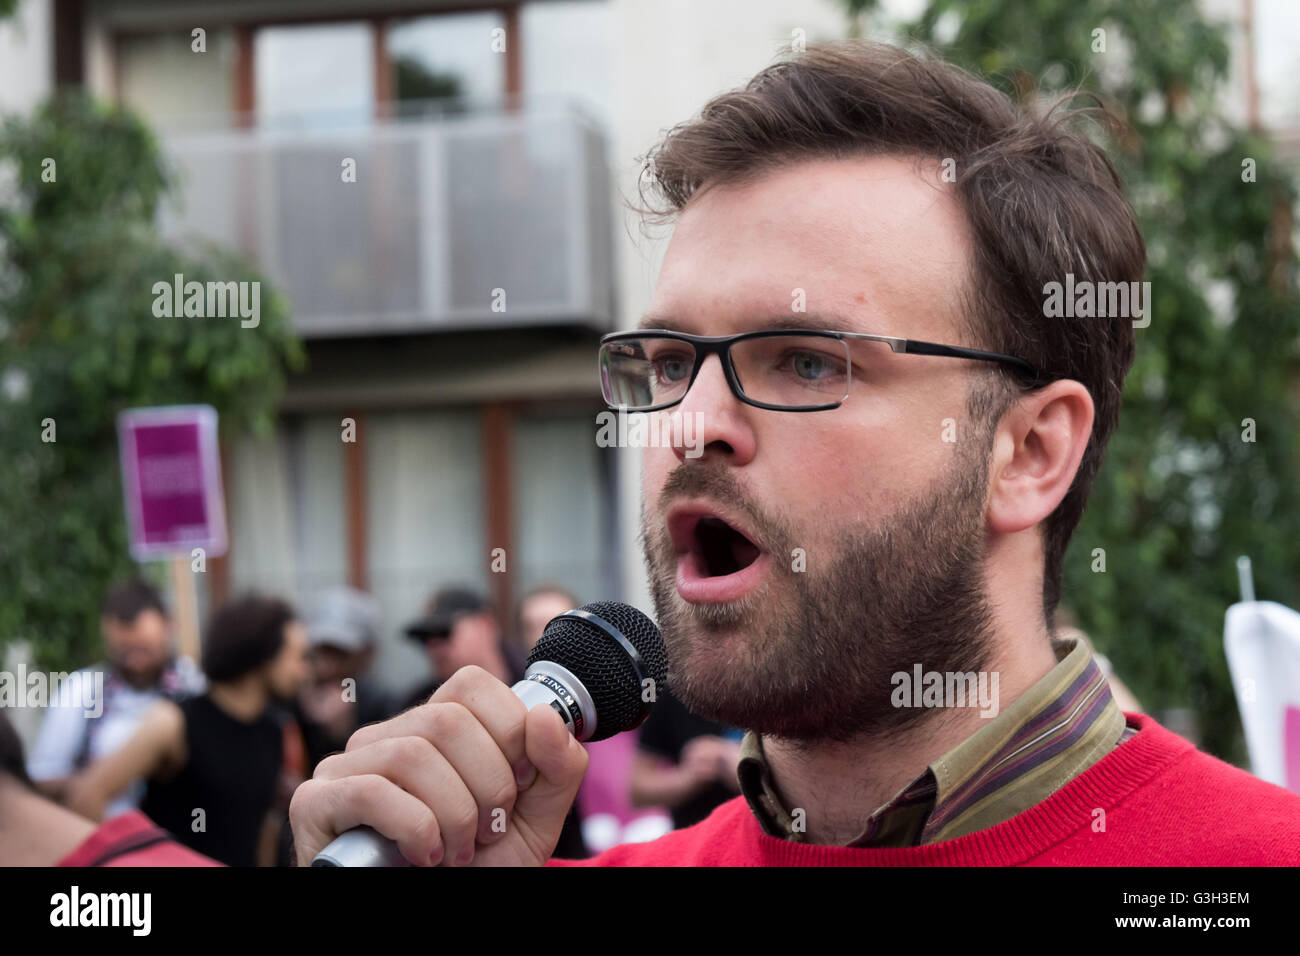 London, UK. June 24th 2016. A man from the Polish left-wing party Razem speaks at the rally in Altab Ali Park on the day after the UK voted to leave the EU against racism, for migrant rights and against fascist violence. They say that migration and immigrants have been attacked and scapegoated not only by both Remain and Leave campaigns but by mainstream parties and media over more than 20 years, stoking up hatred by insisting immigrants are a 'problem'.Peter Marshall/Alamy Live News Stock Photo